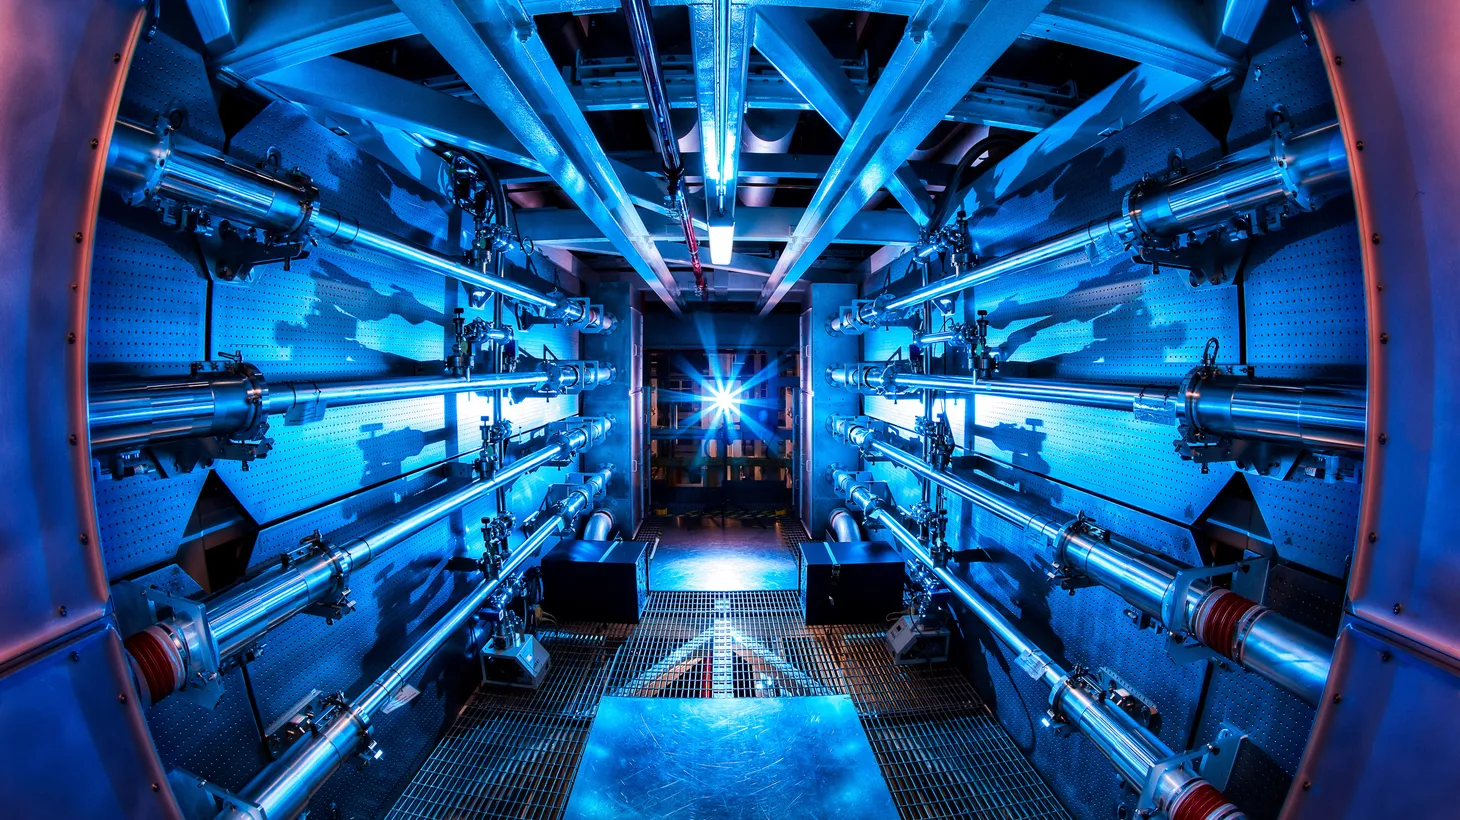 The National Ignition Facility’s preamplifier module increases the laser energy as it travels to the Target Chamber in an undated photograph at Lawrence Livermore National Laboratory federal research facility in Livermore, California, U.S.